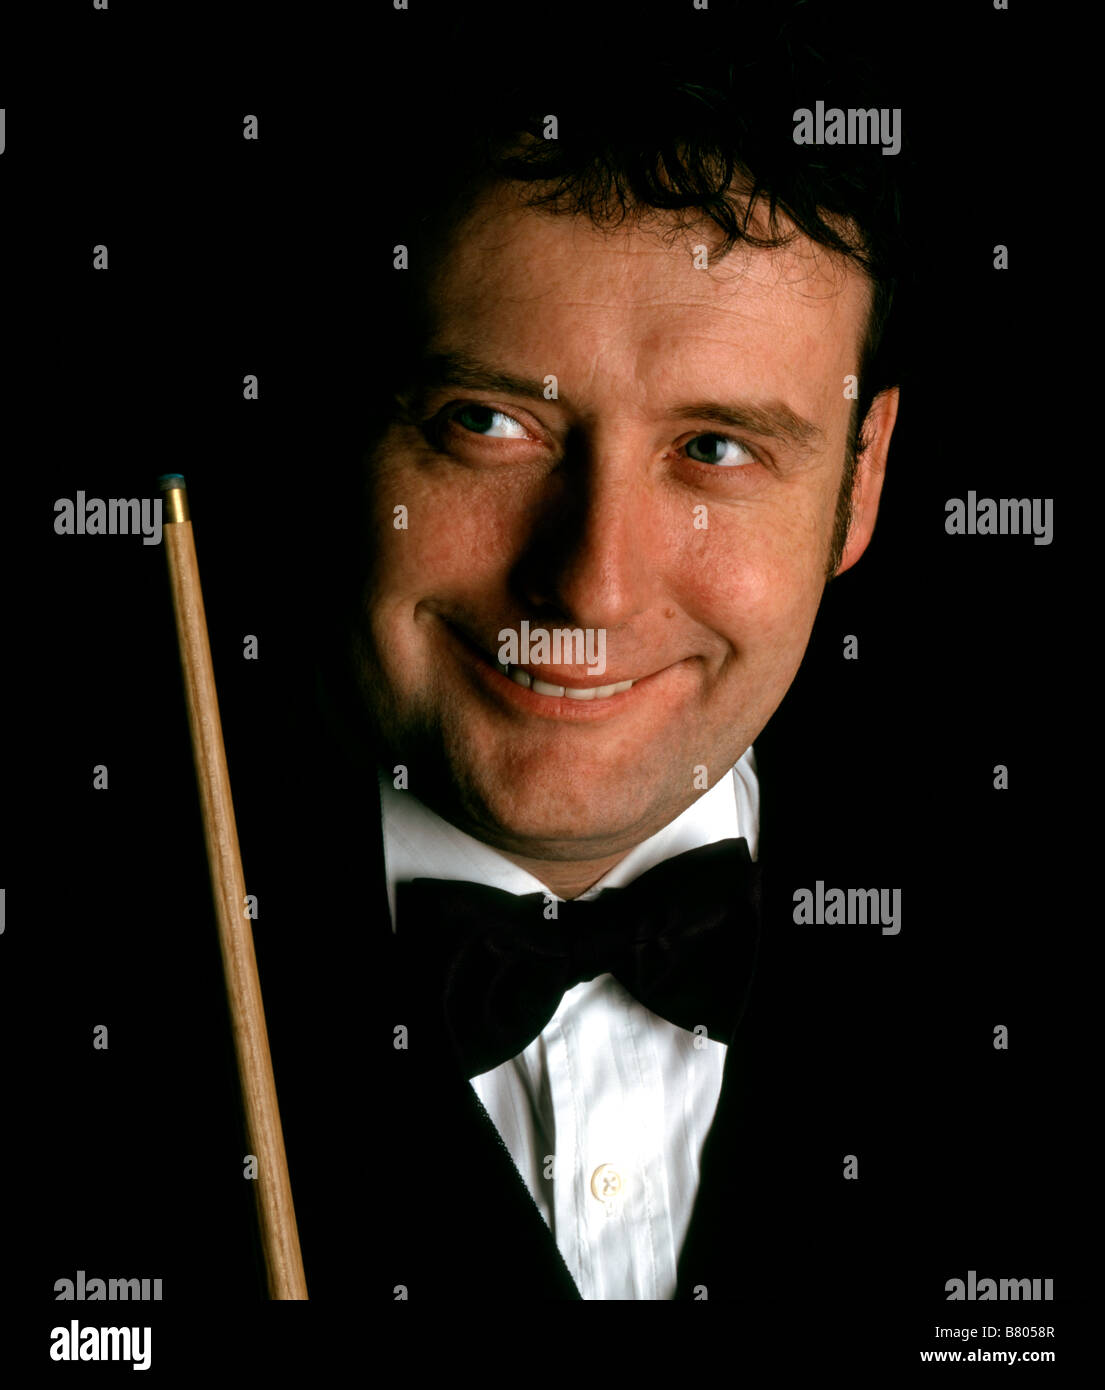 JIMMY WHITE SNOOKER PLAYER Stock Photo